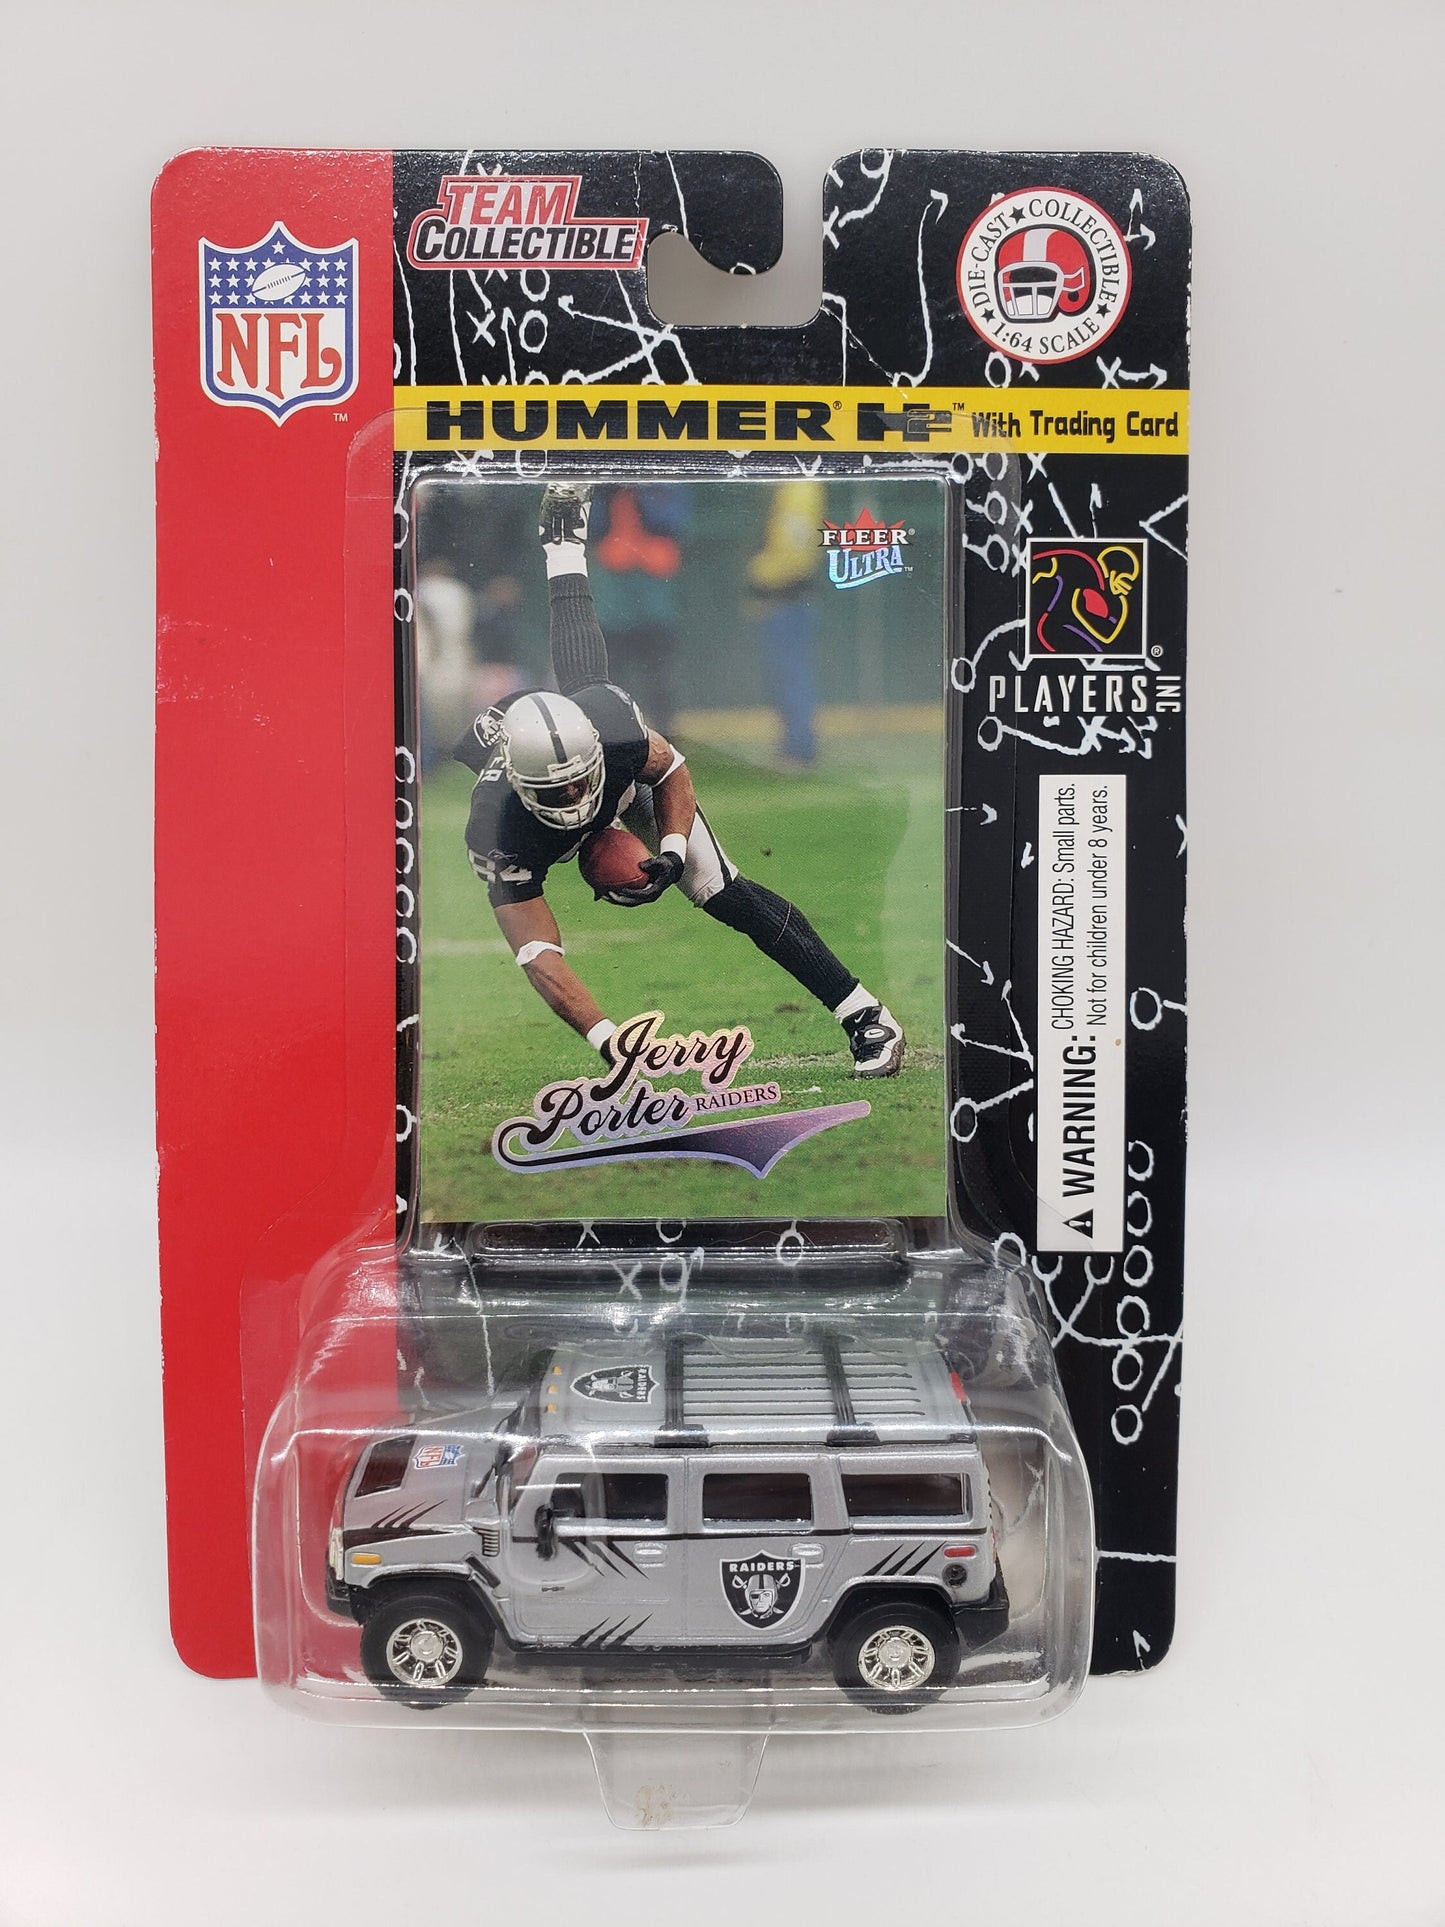 Hummer H2 Raiders Jerry Porter Silver and Black Fleer Collectable Scale Miniature Model Toy Car Raiders Trading Card Perfect Birthday Gift